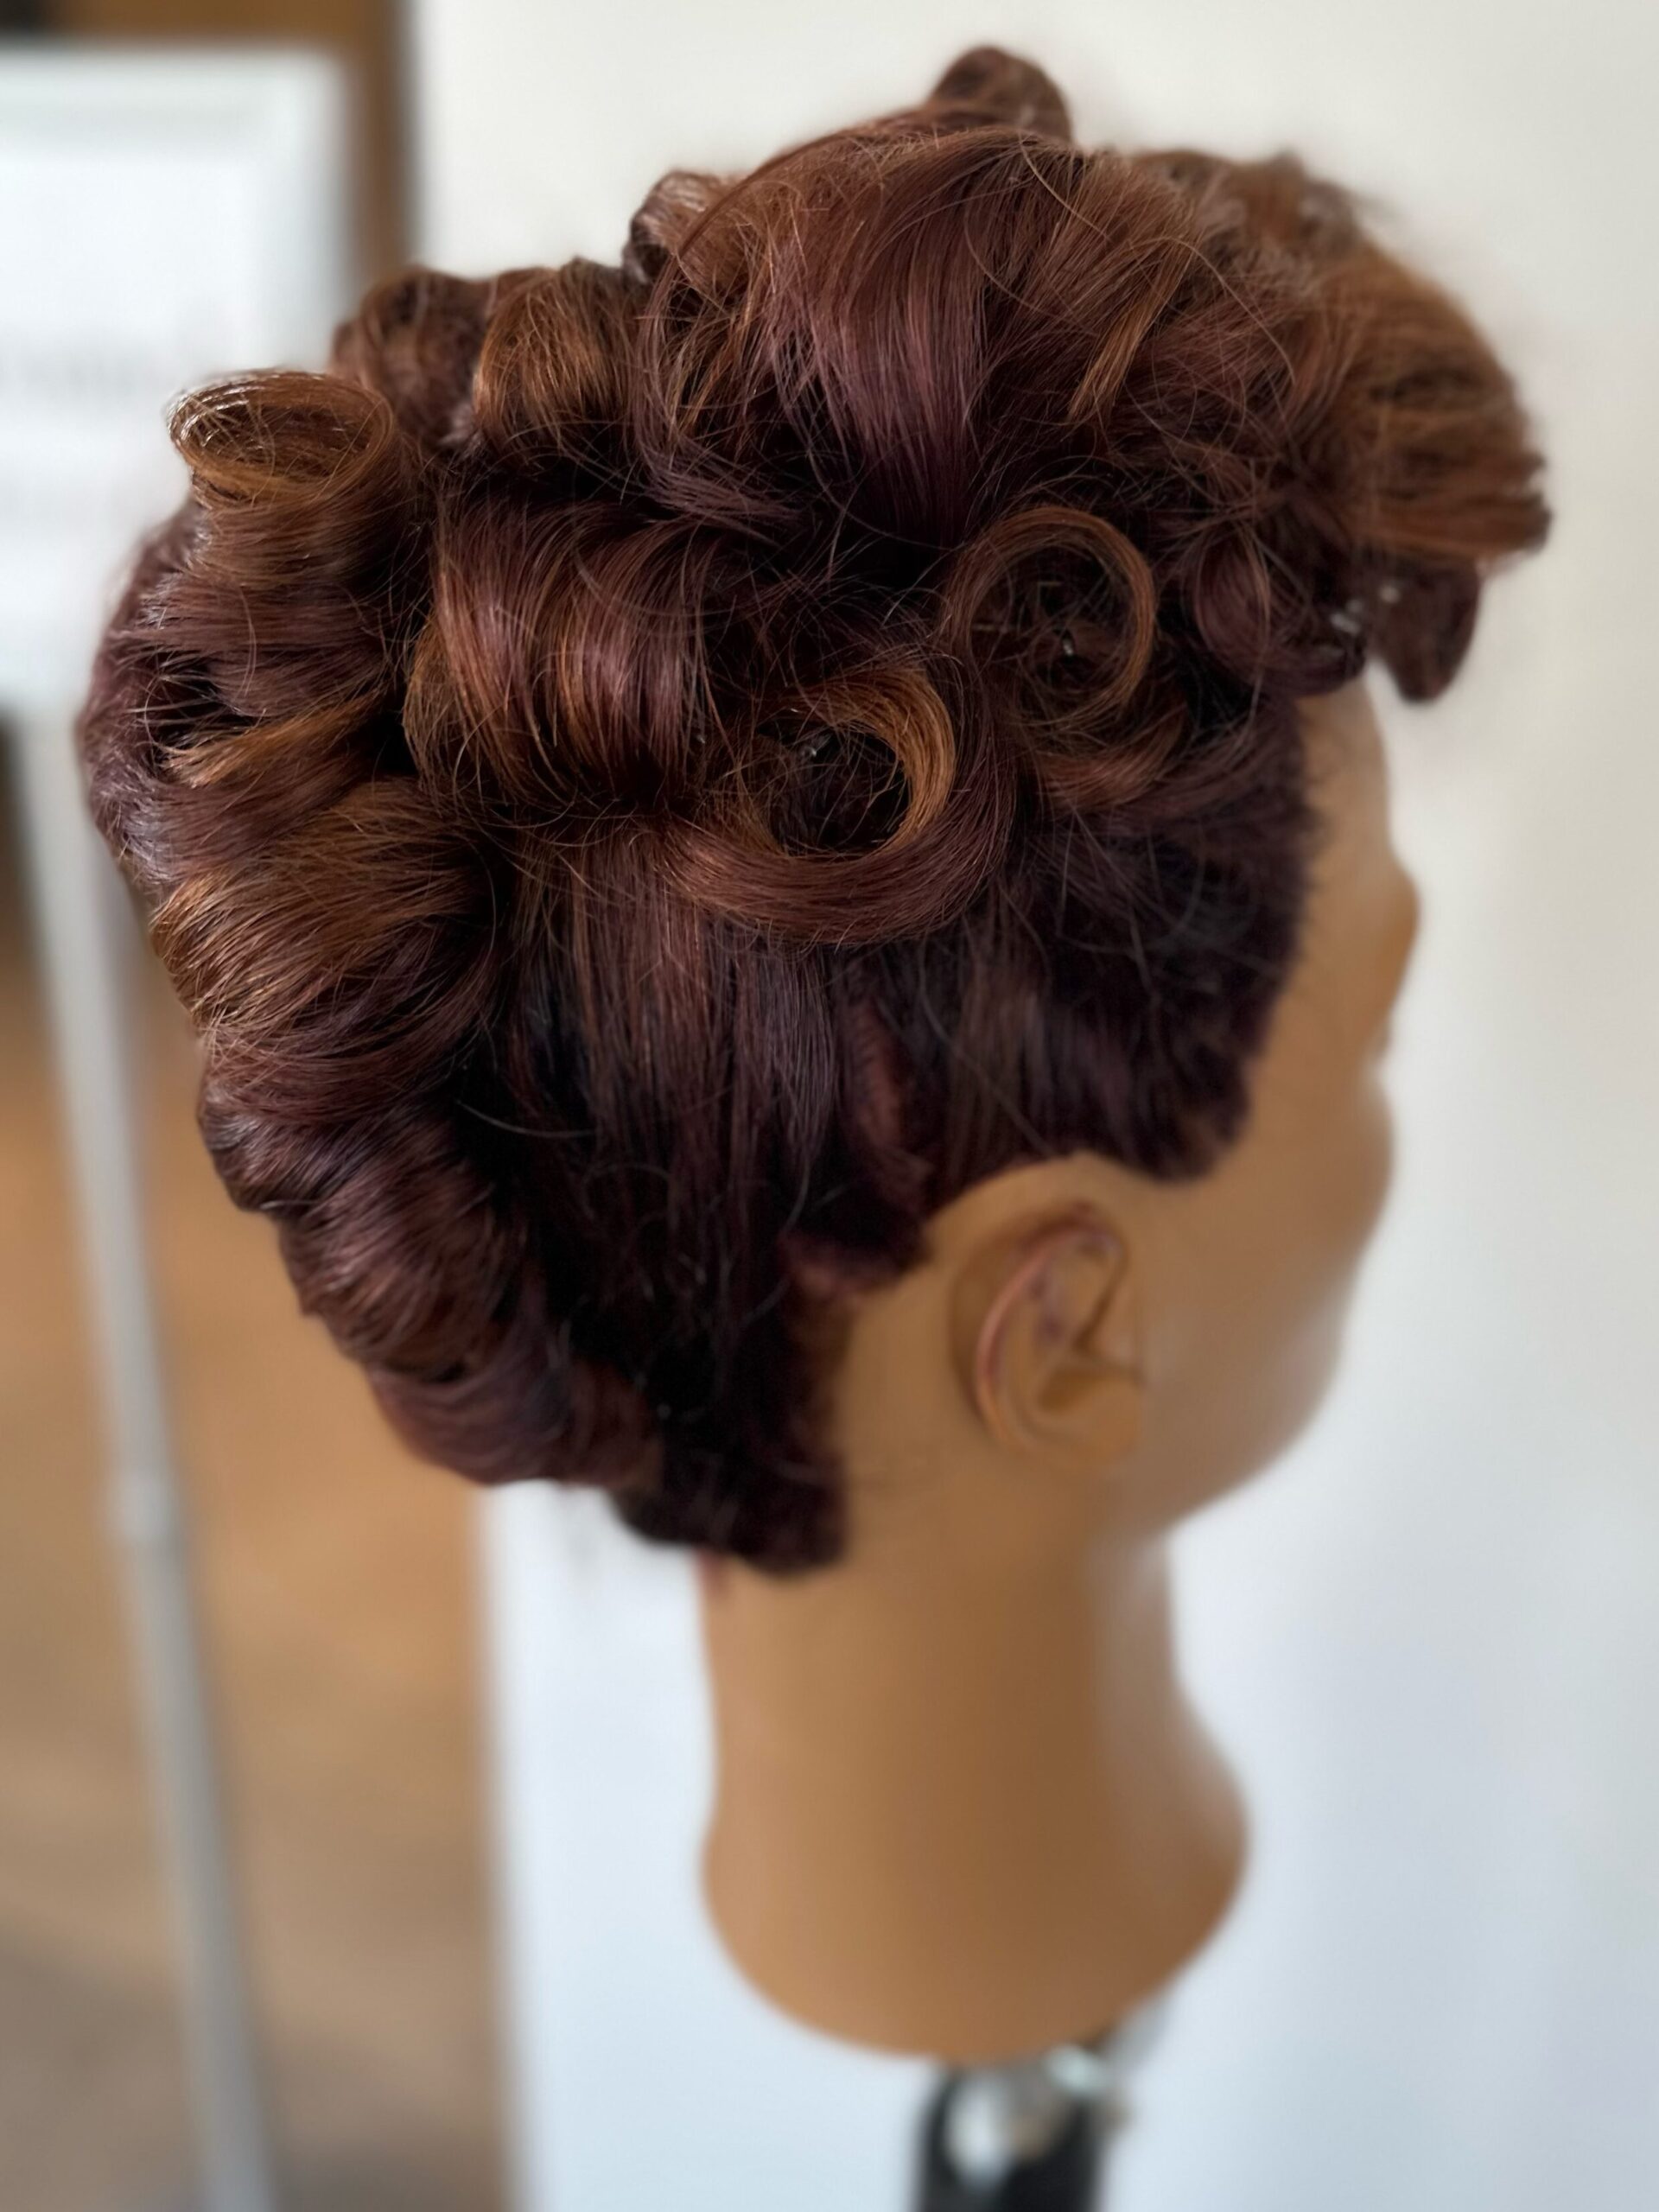 Formal hair for prom or wedding. Hairstyle where mountains of curls are piled on the back and top of head. Mannequin is facing right.